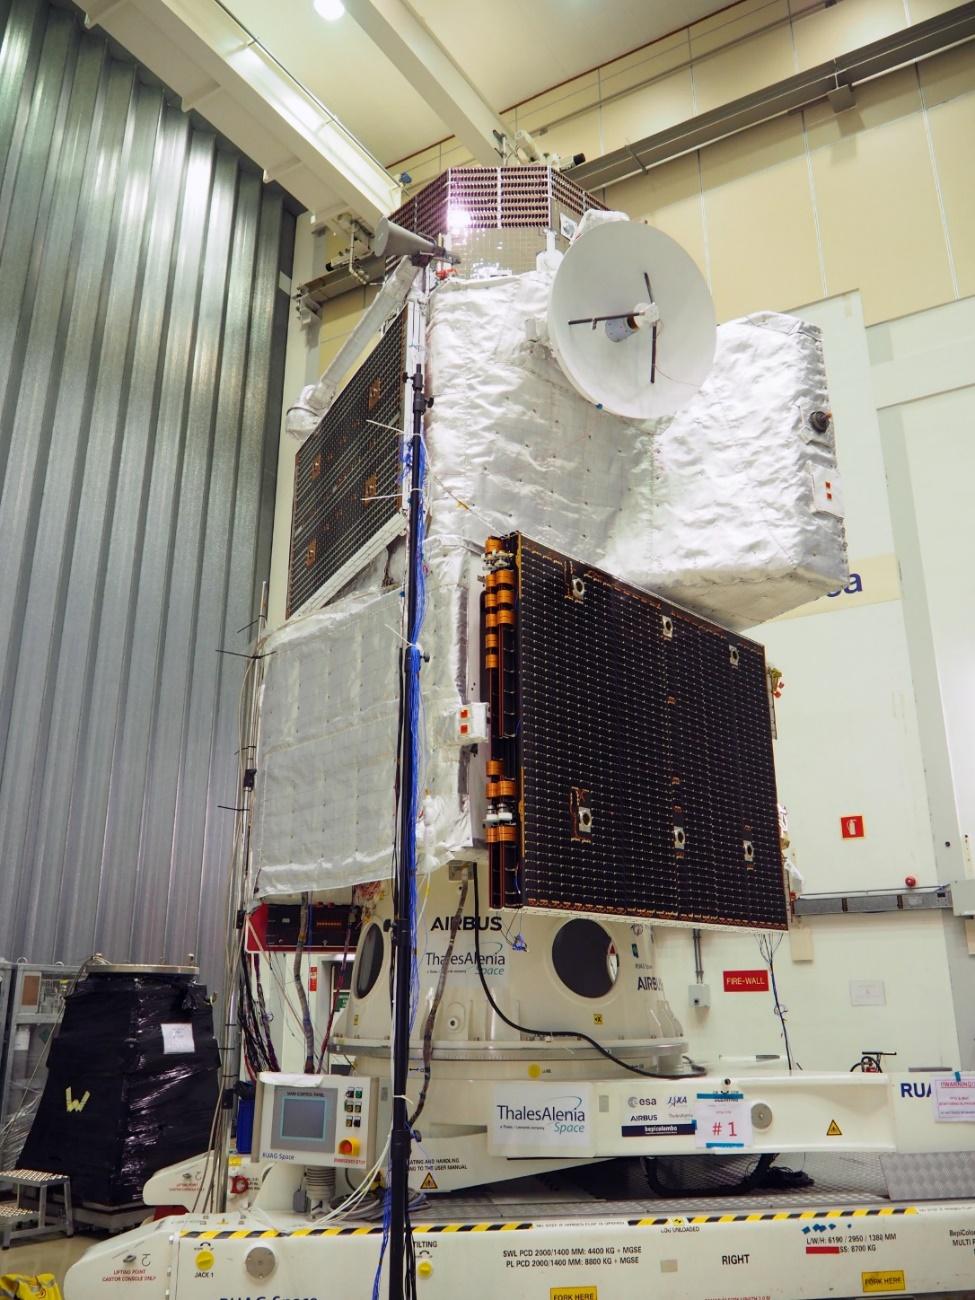 BepiColombo is getting ready for launch!